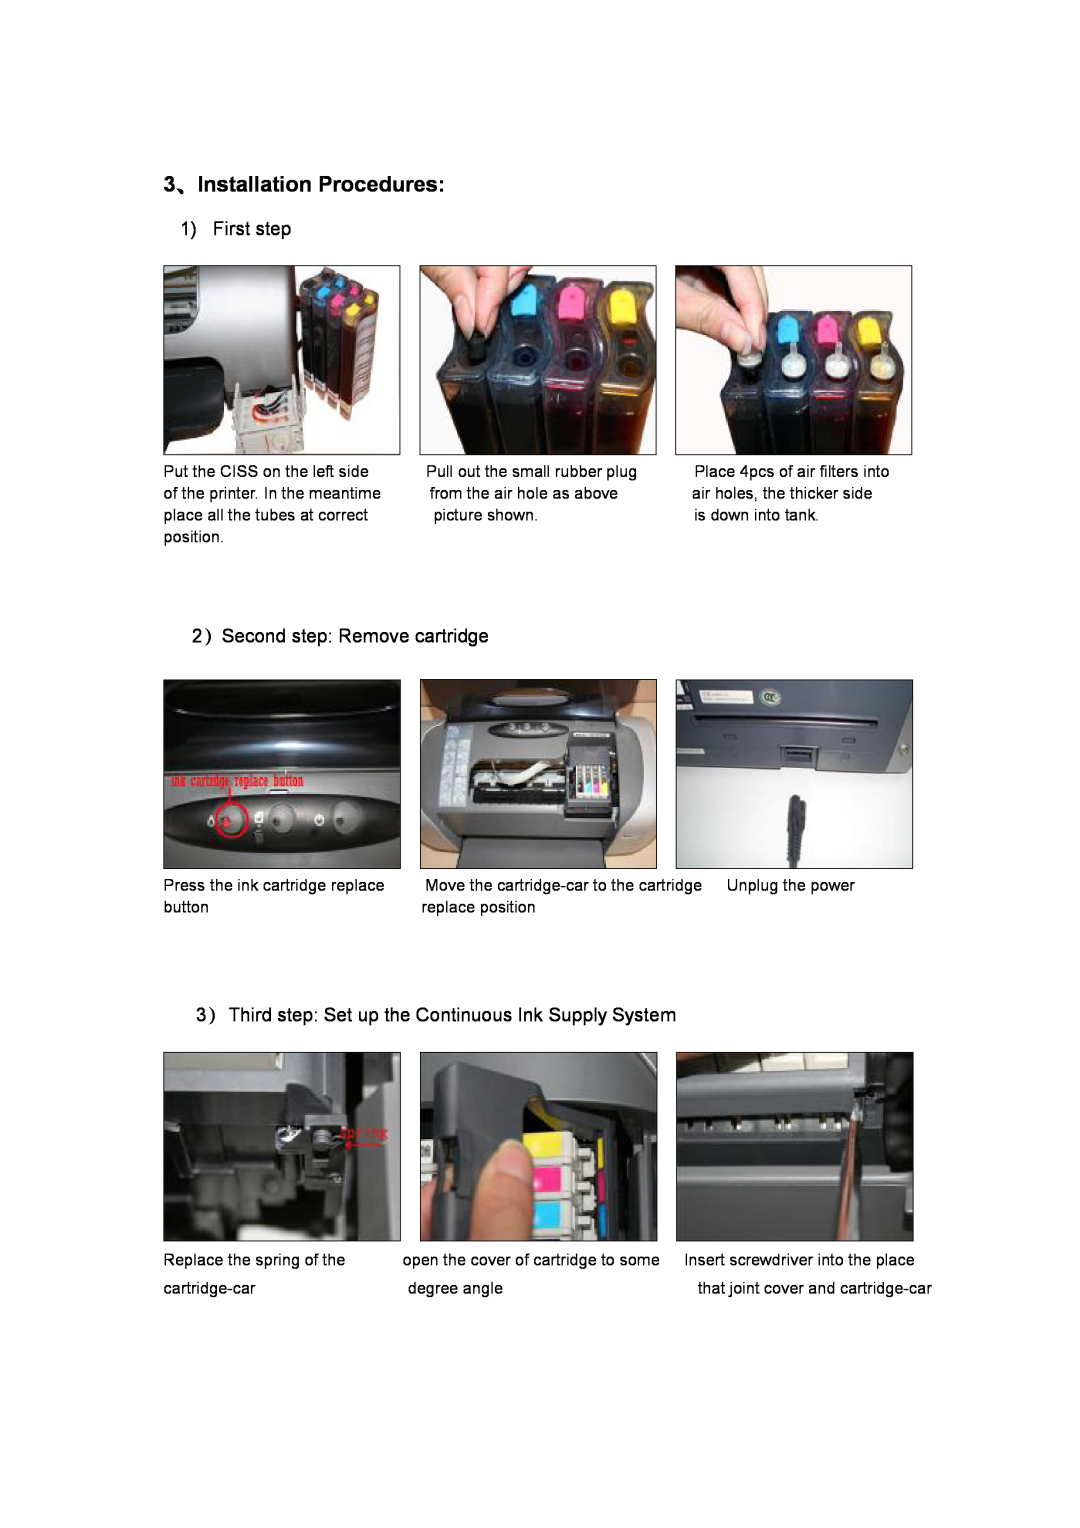 Epson C88 manual 3、Installation Procedures, First step, 2）Second step Remove cartridge 